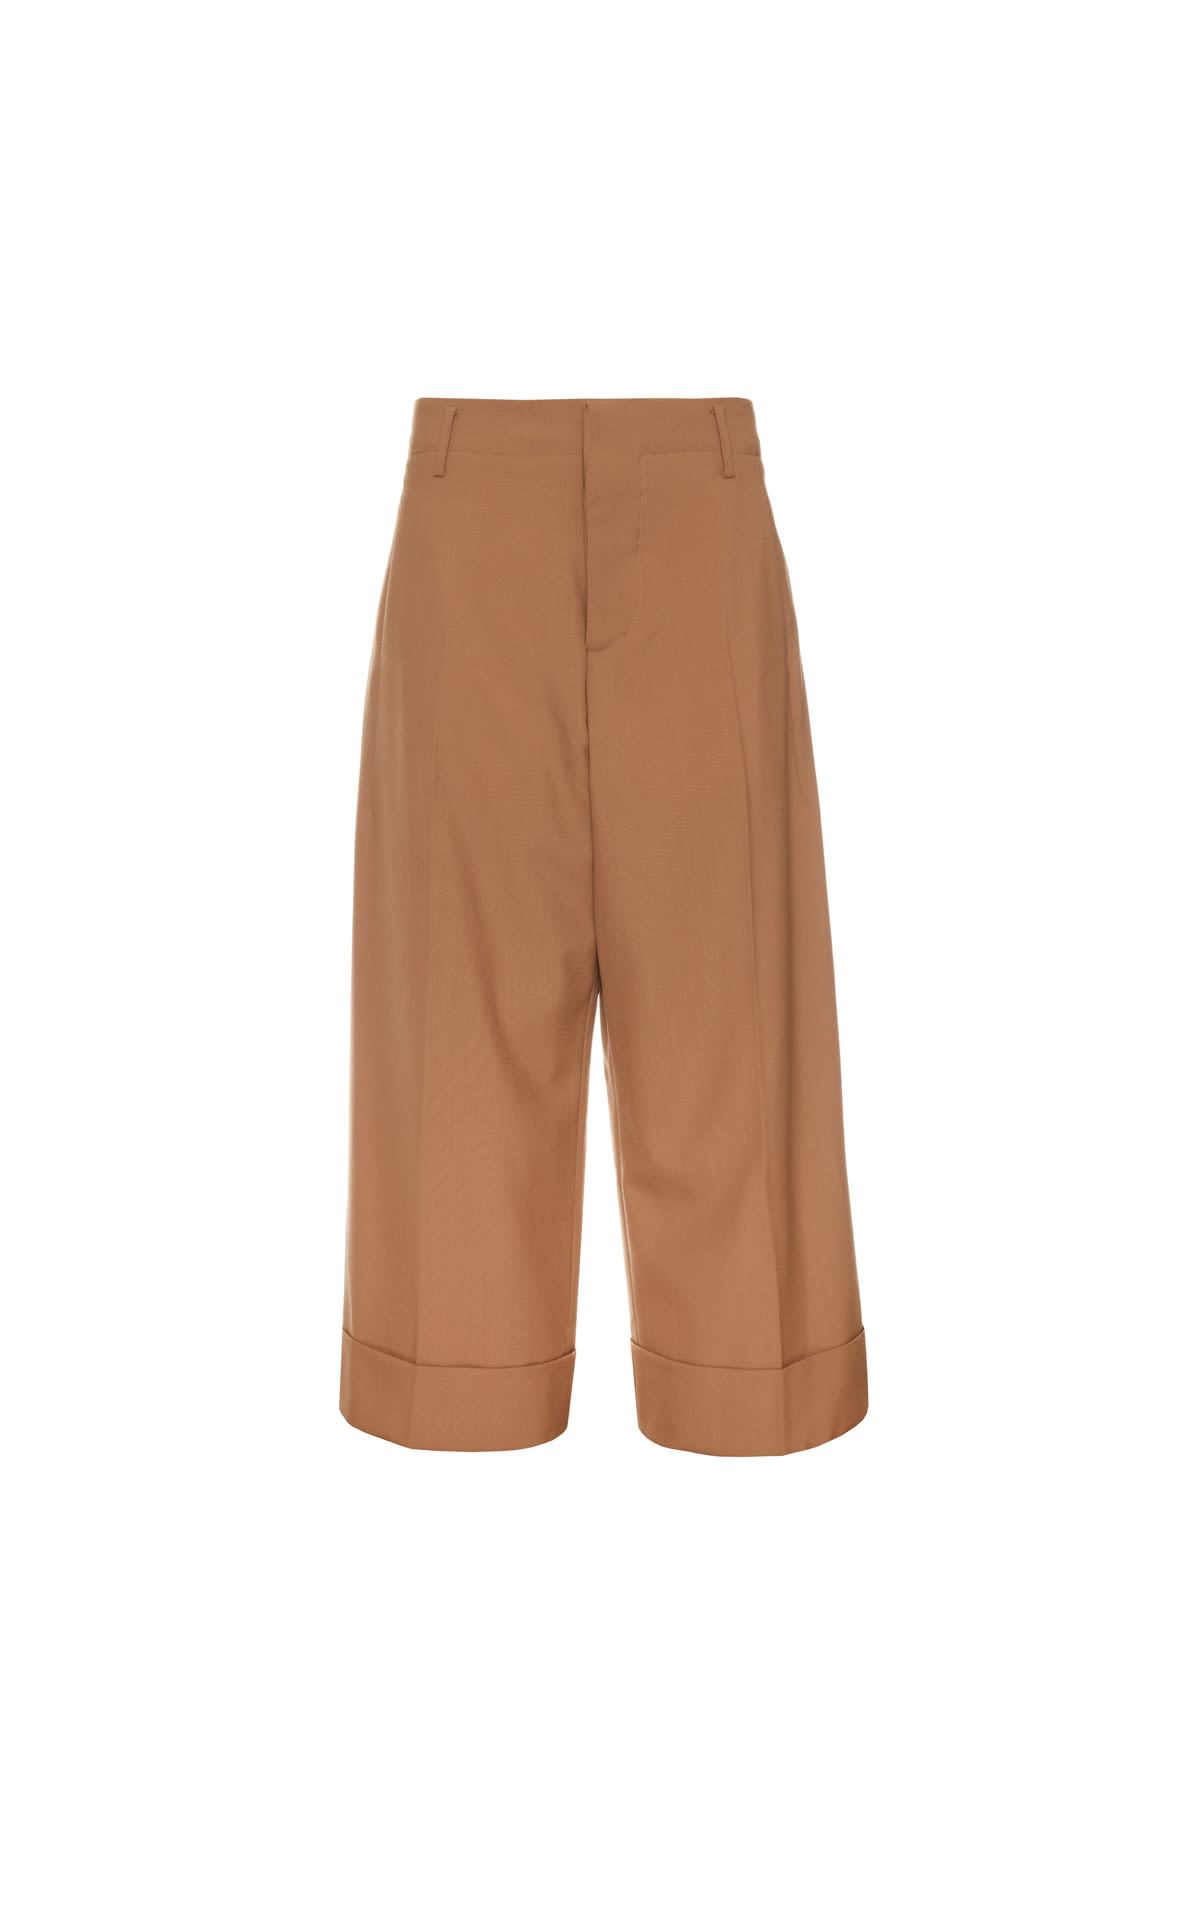 Marni Trouser tropical wood hazelnut from Bicester Village